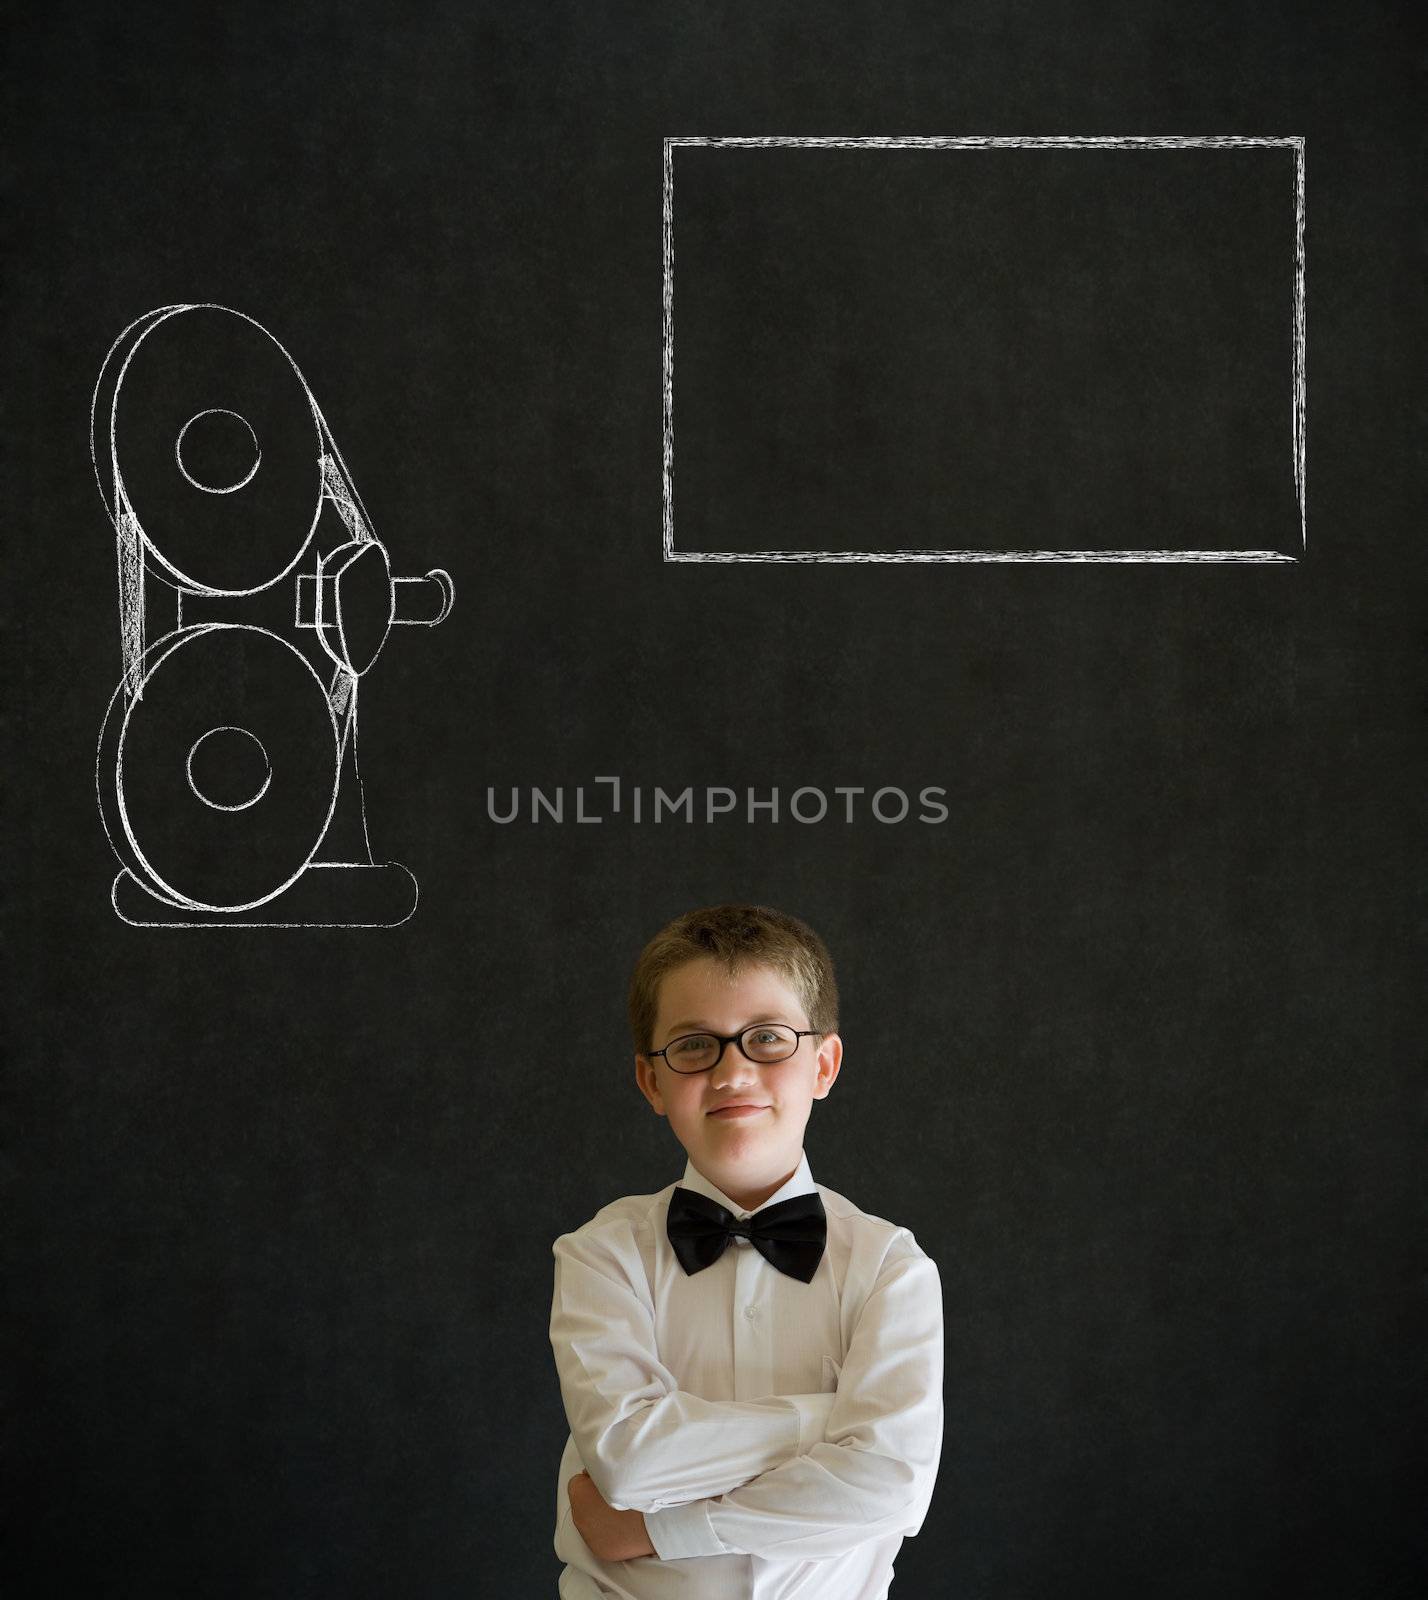 Thinking boy dressed up as business man with retro chalk film projector on blackboard background